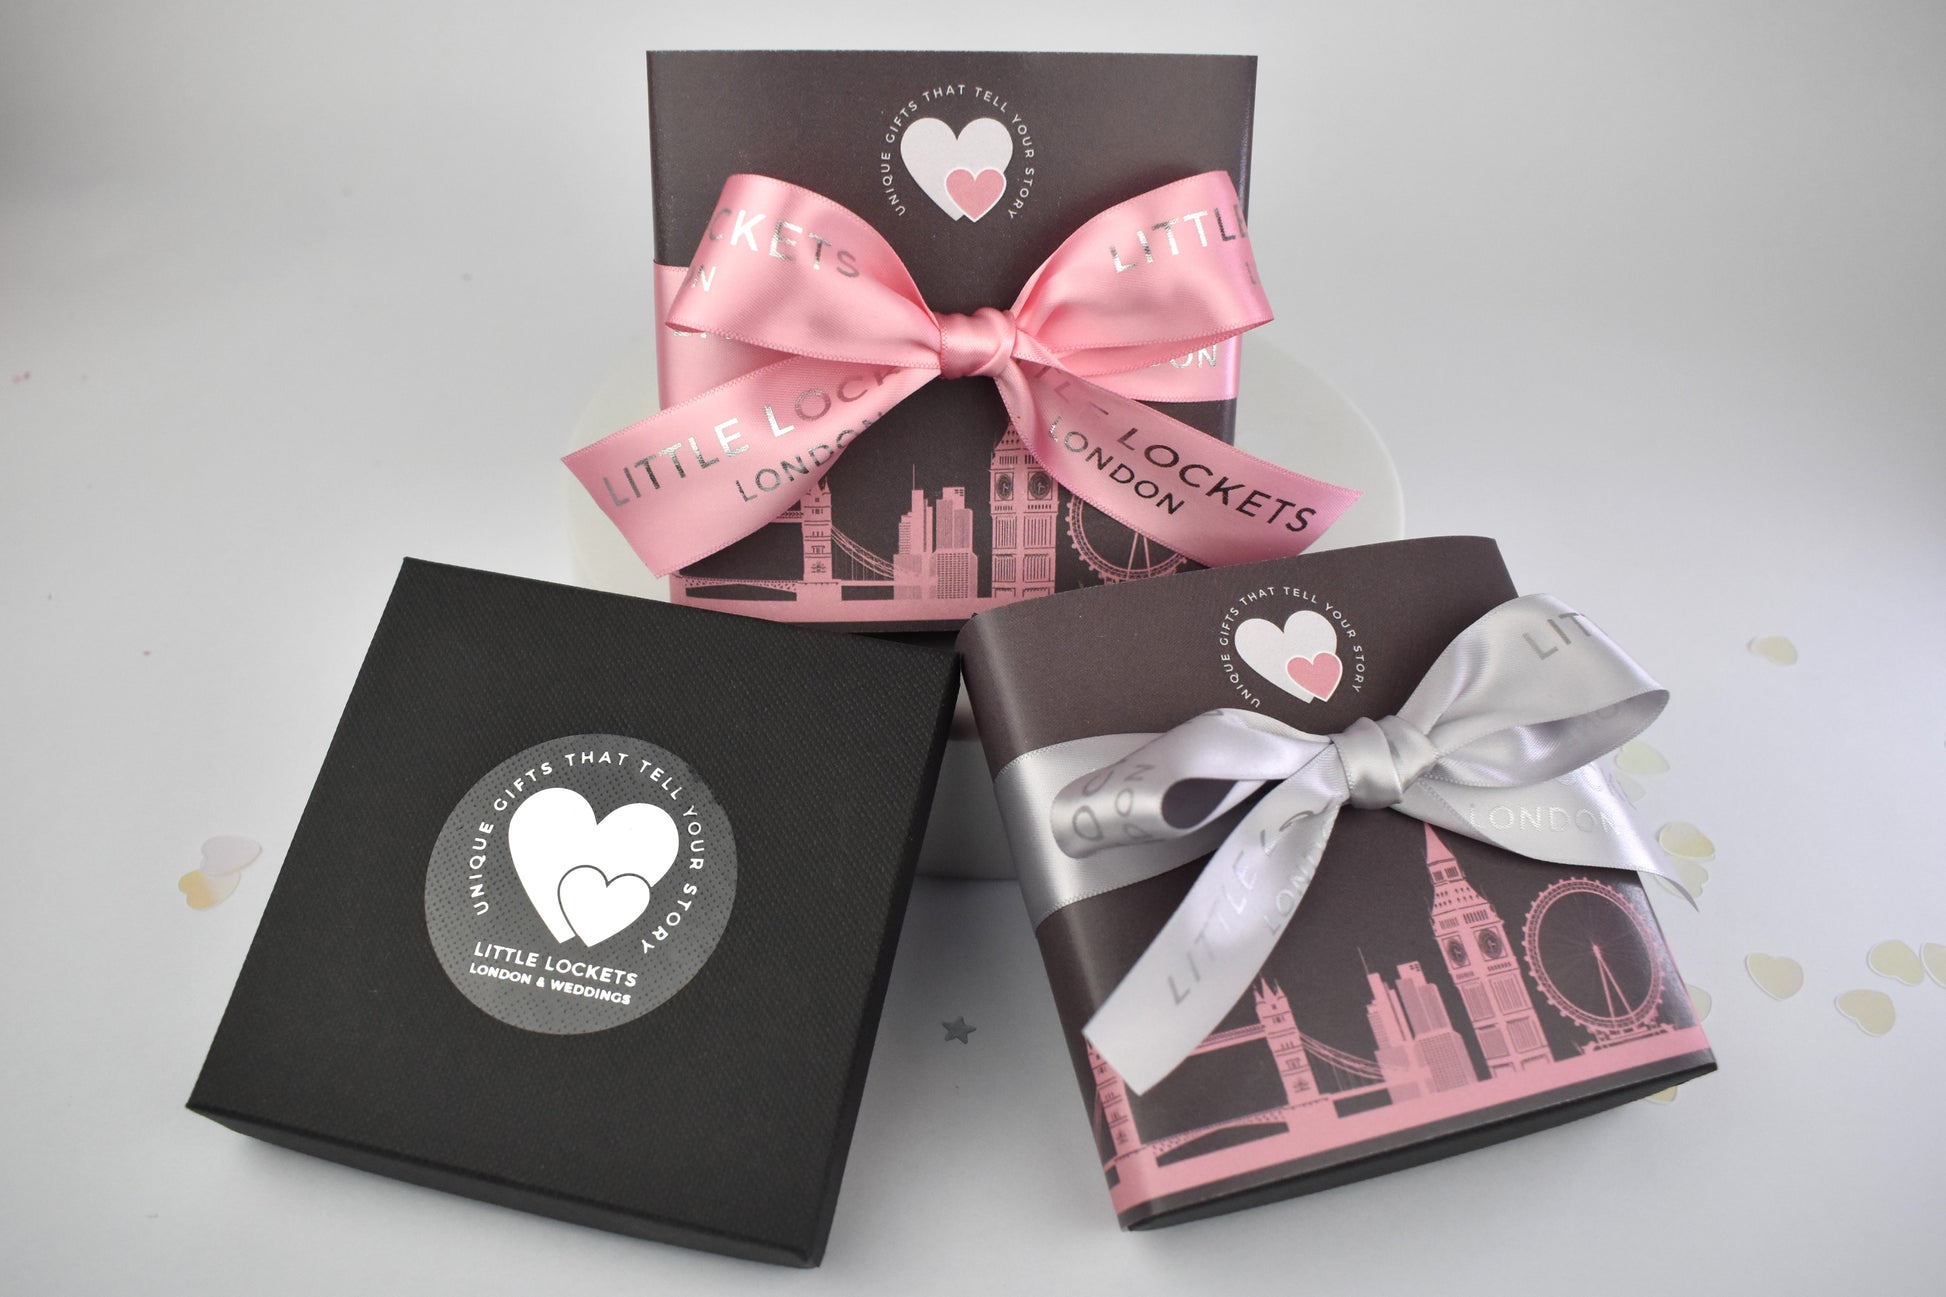 Your gift will arrive in a branded gift box or upgrade to a London wrap with a pink or grey printed ribbon.